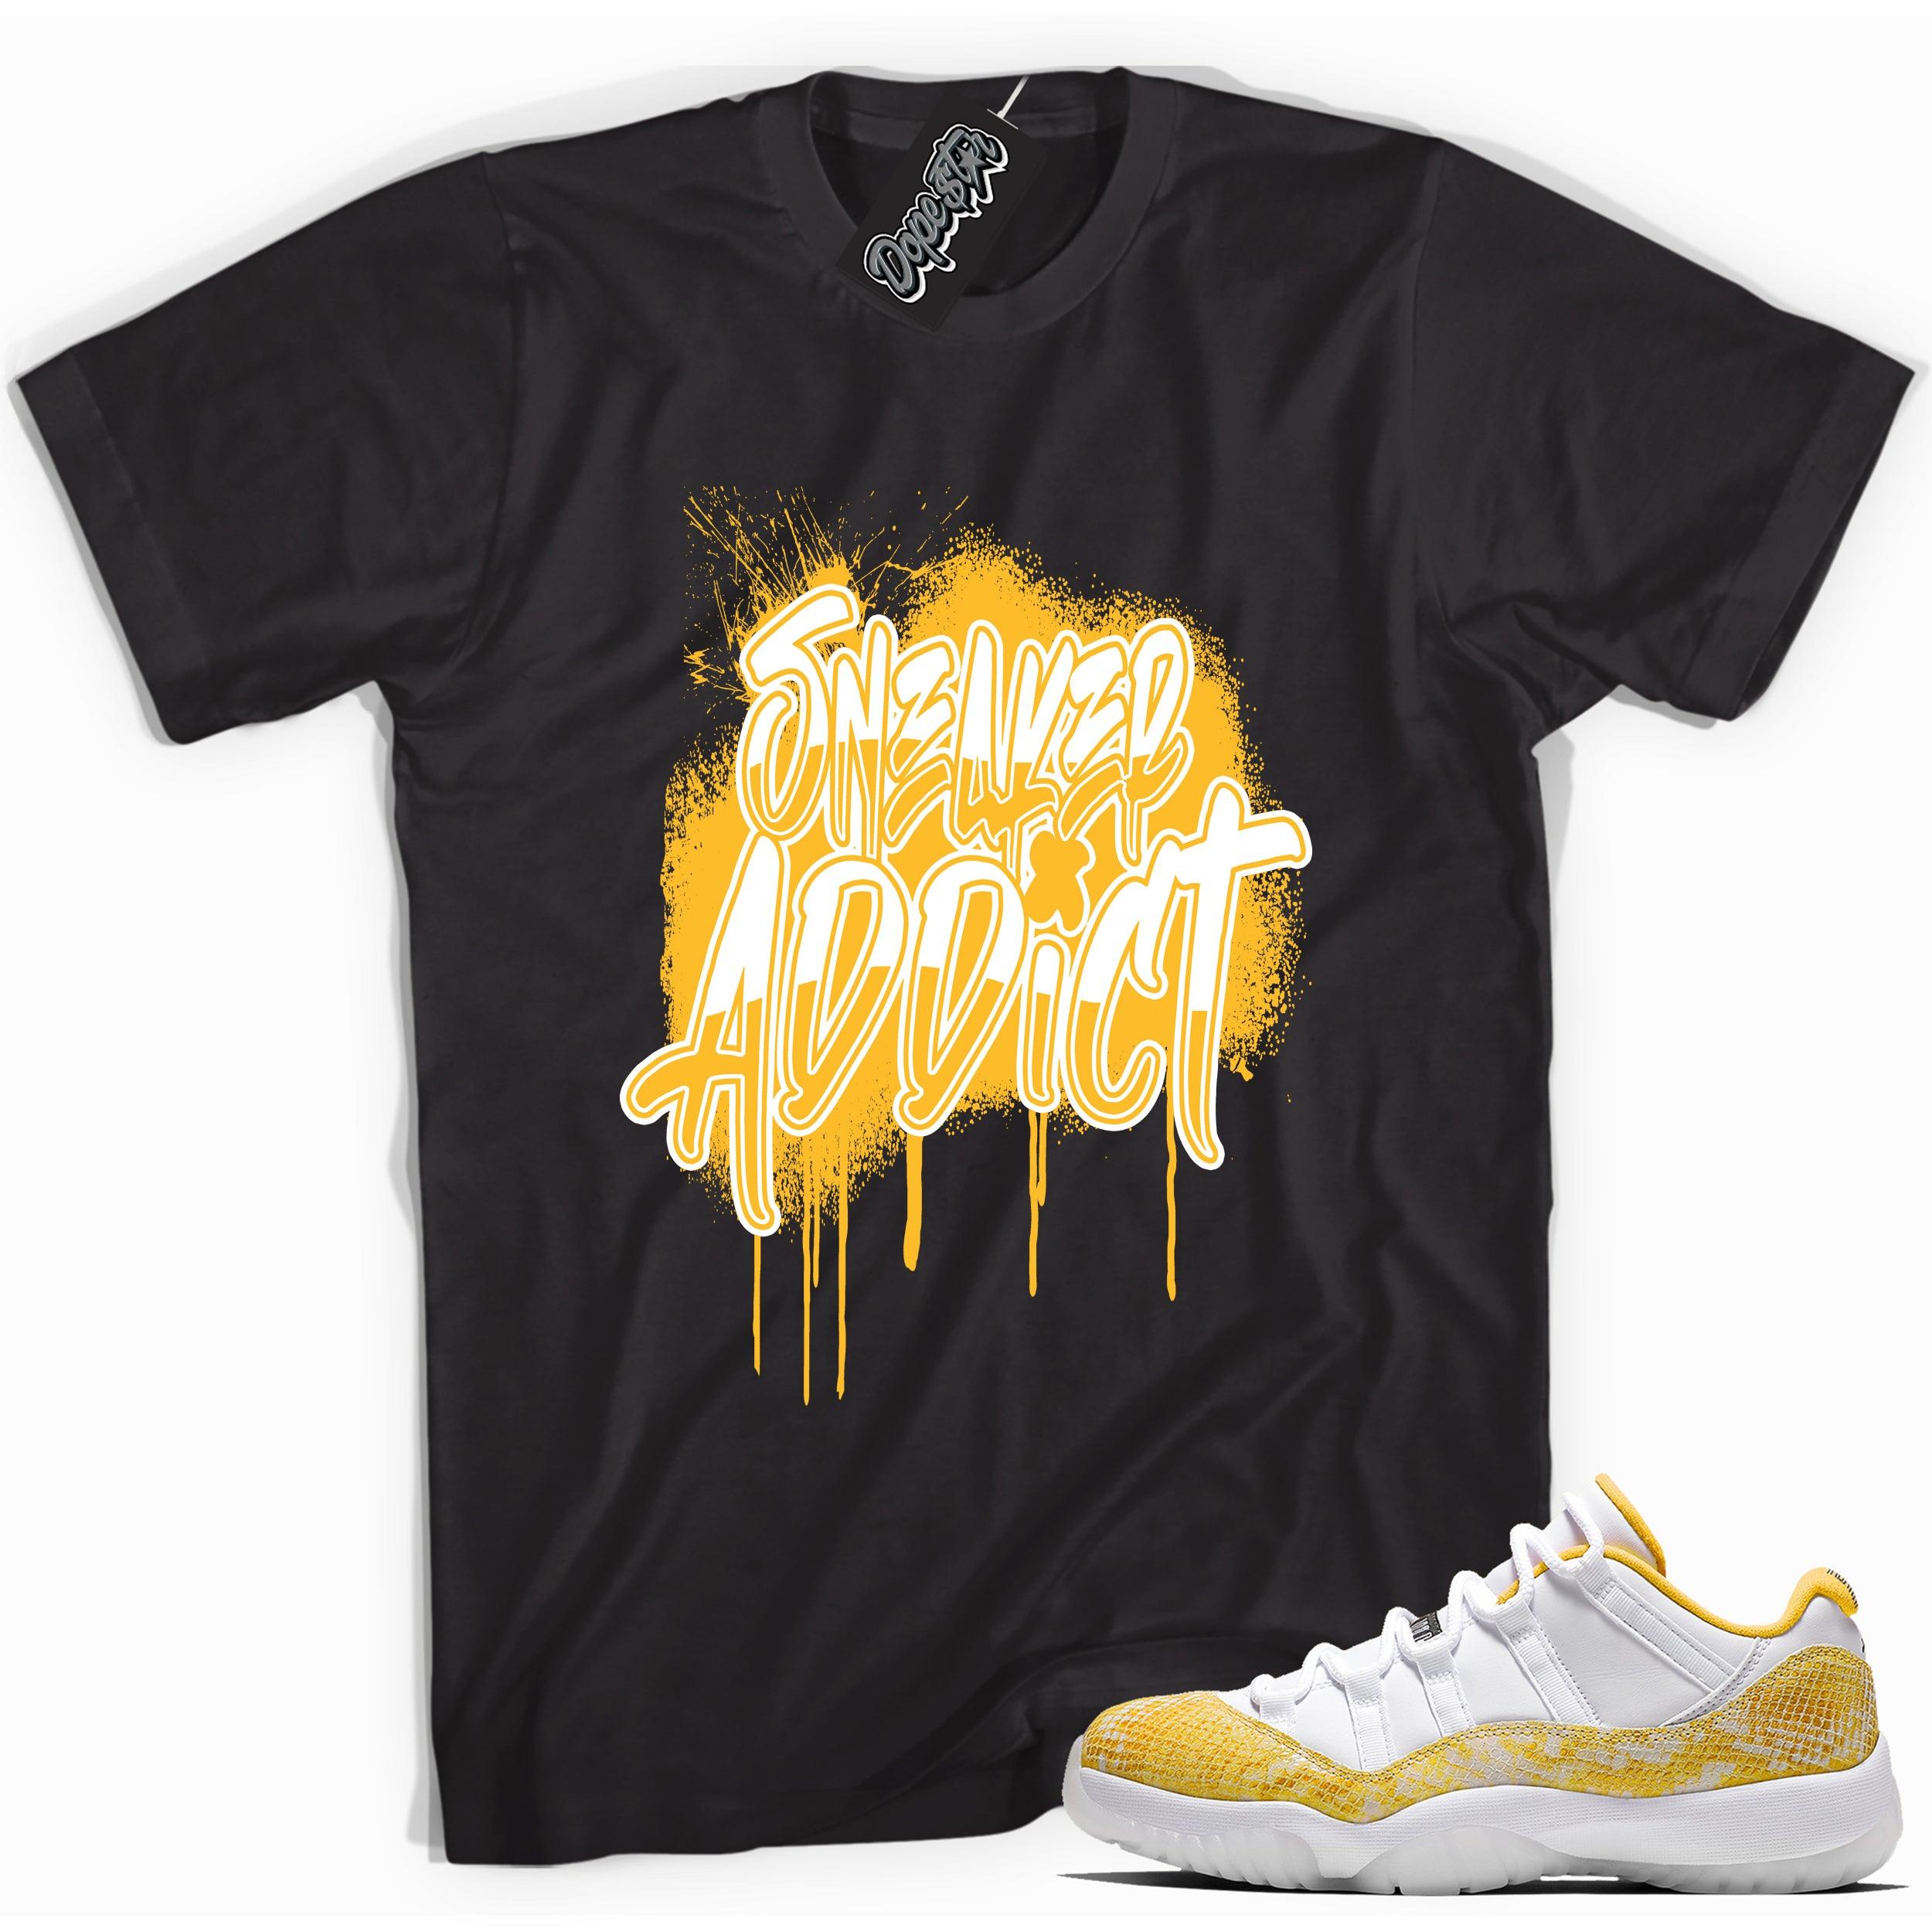 Cool black graphic tee with 'sneaker addict' print, that perfectly matches  Air Jordan 11 Retro Low Yellow Snakeskin sneakers